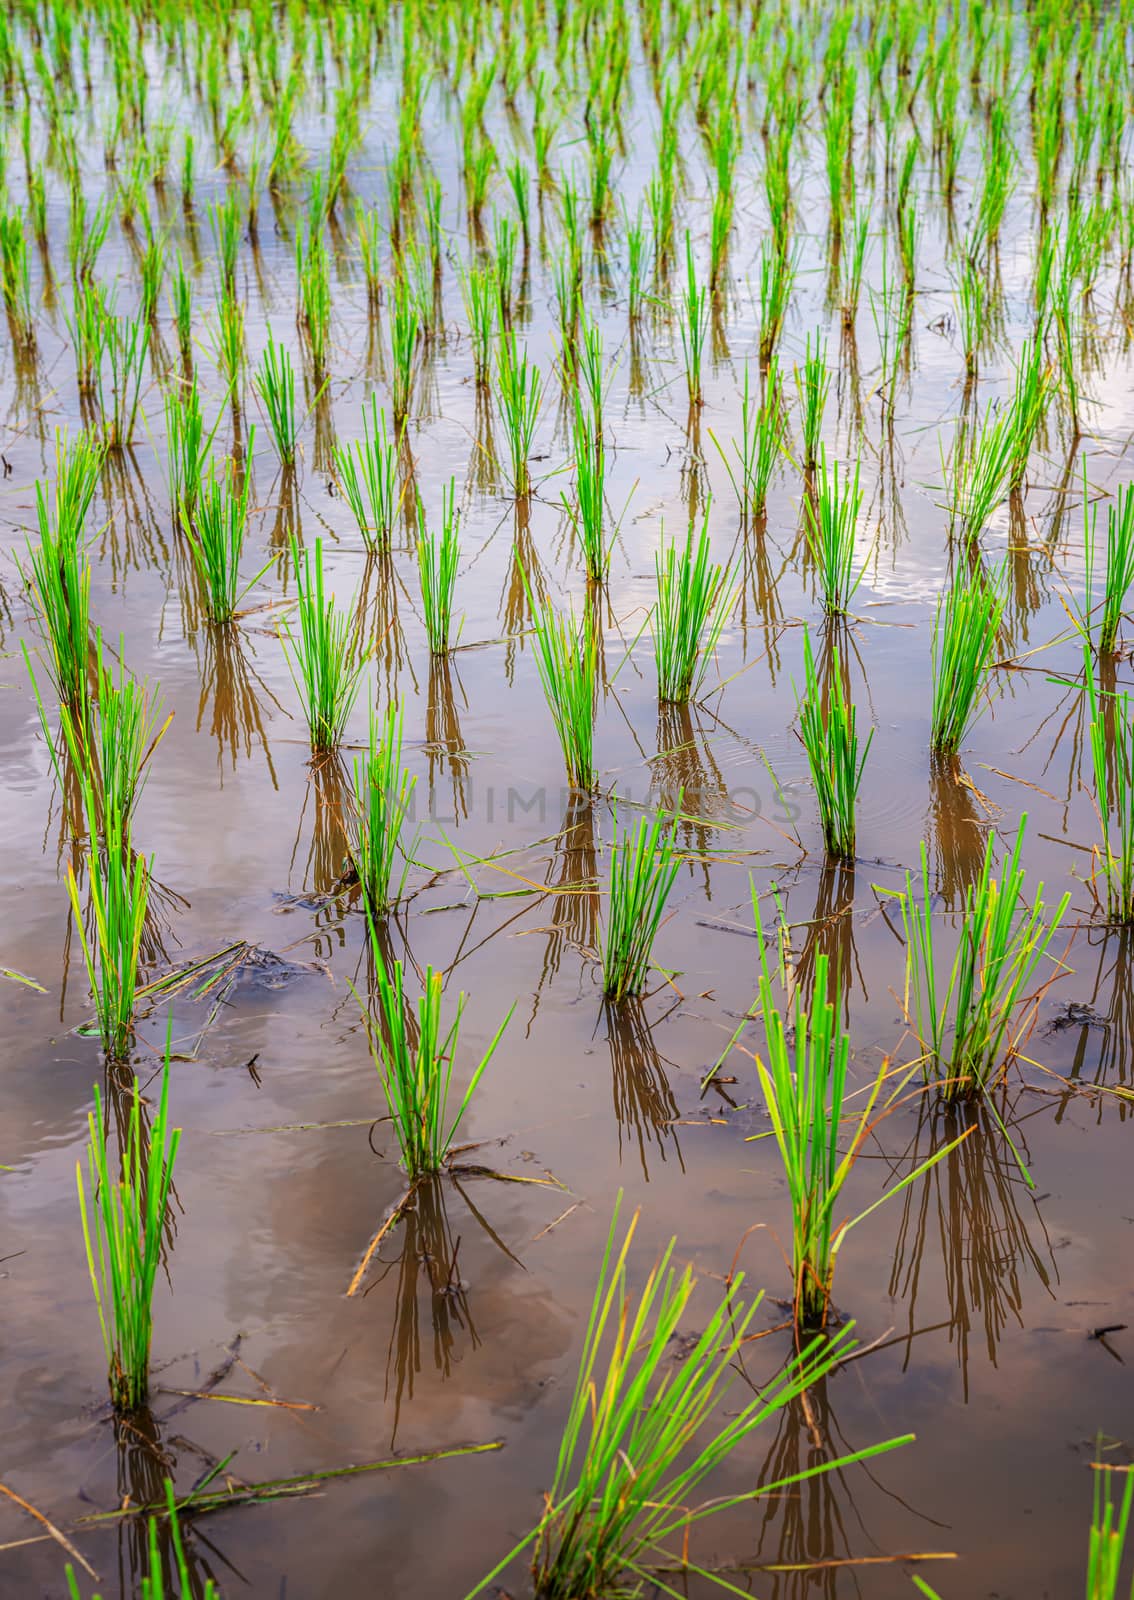 Rice seedlings are beautifully lined up in the water waiting to grow.